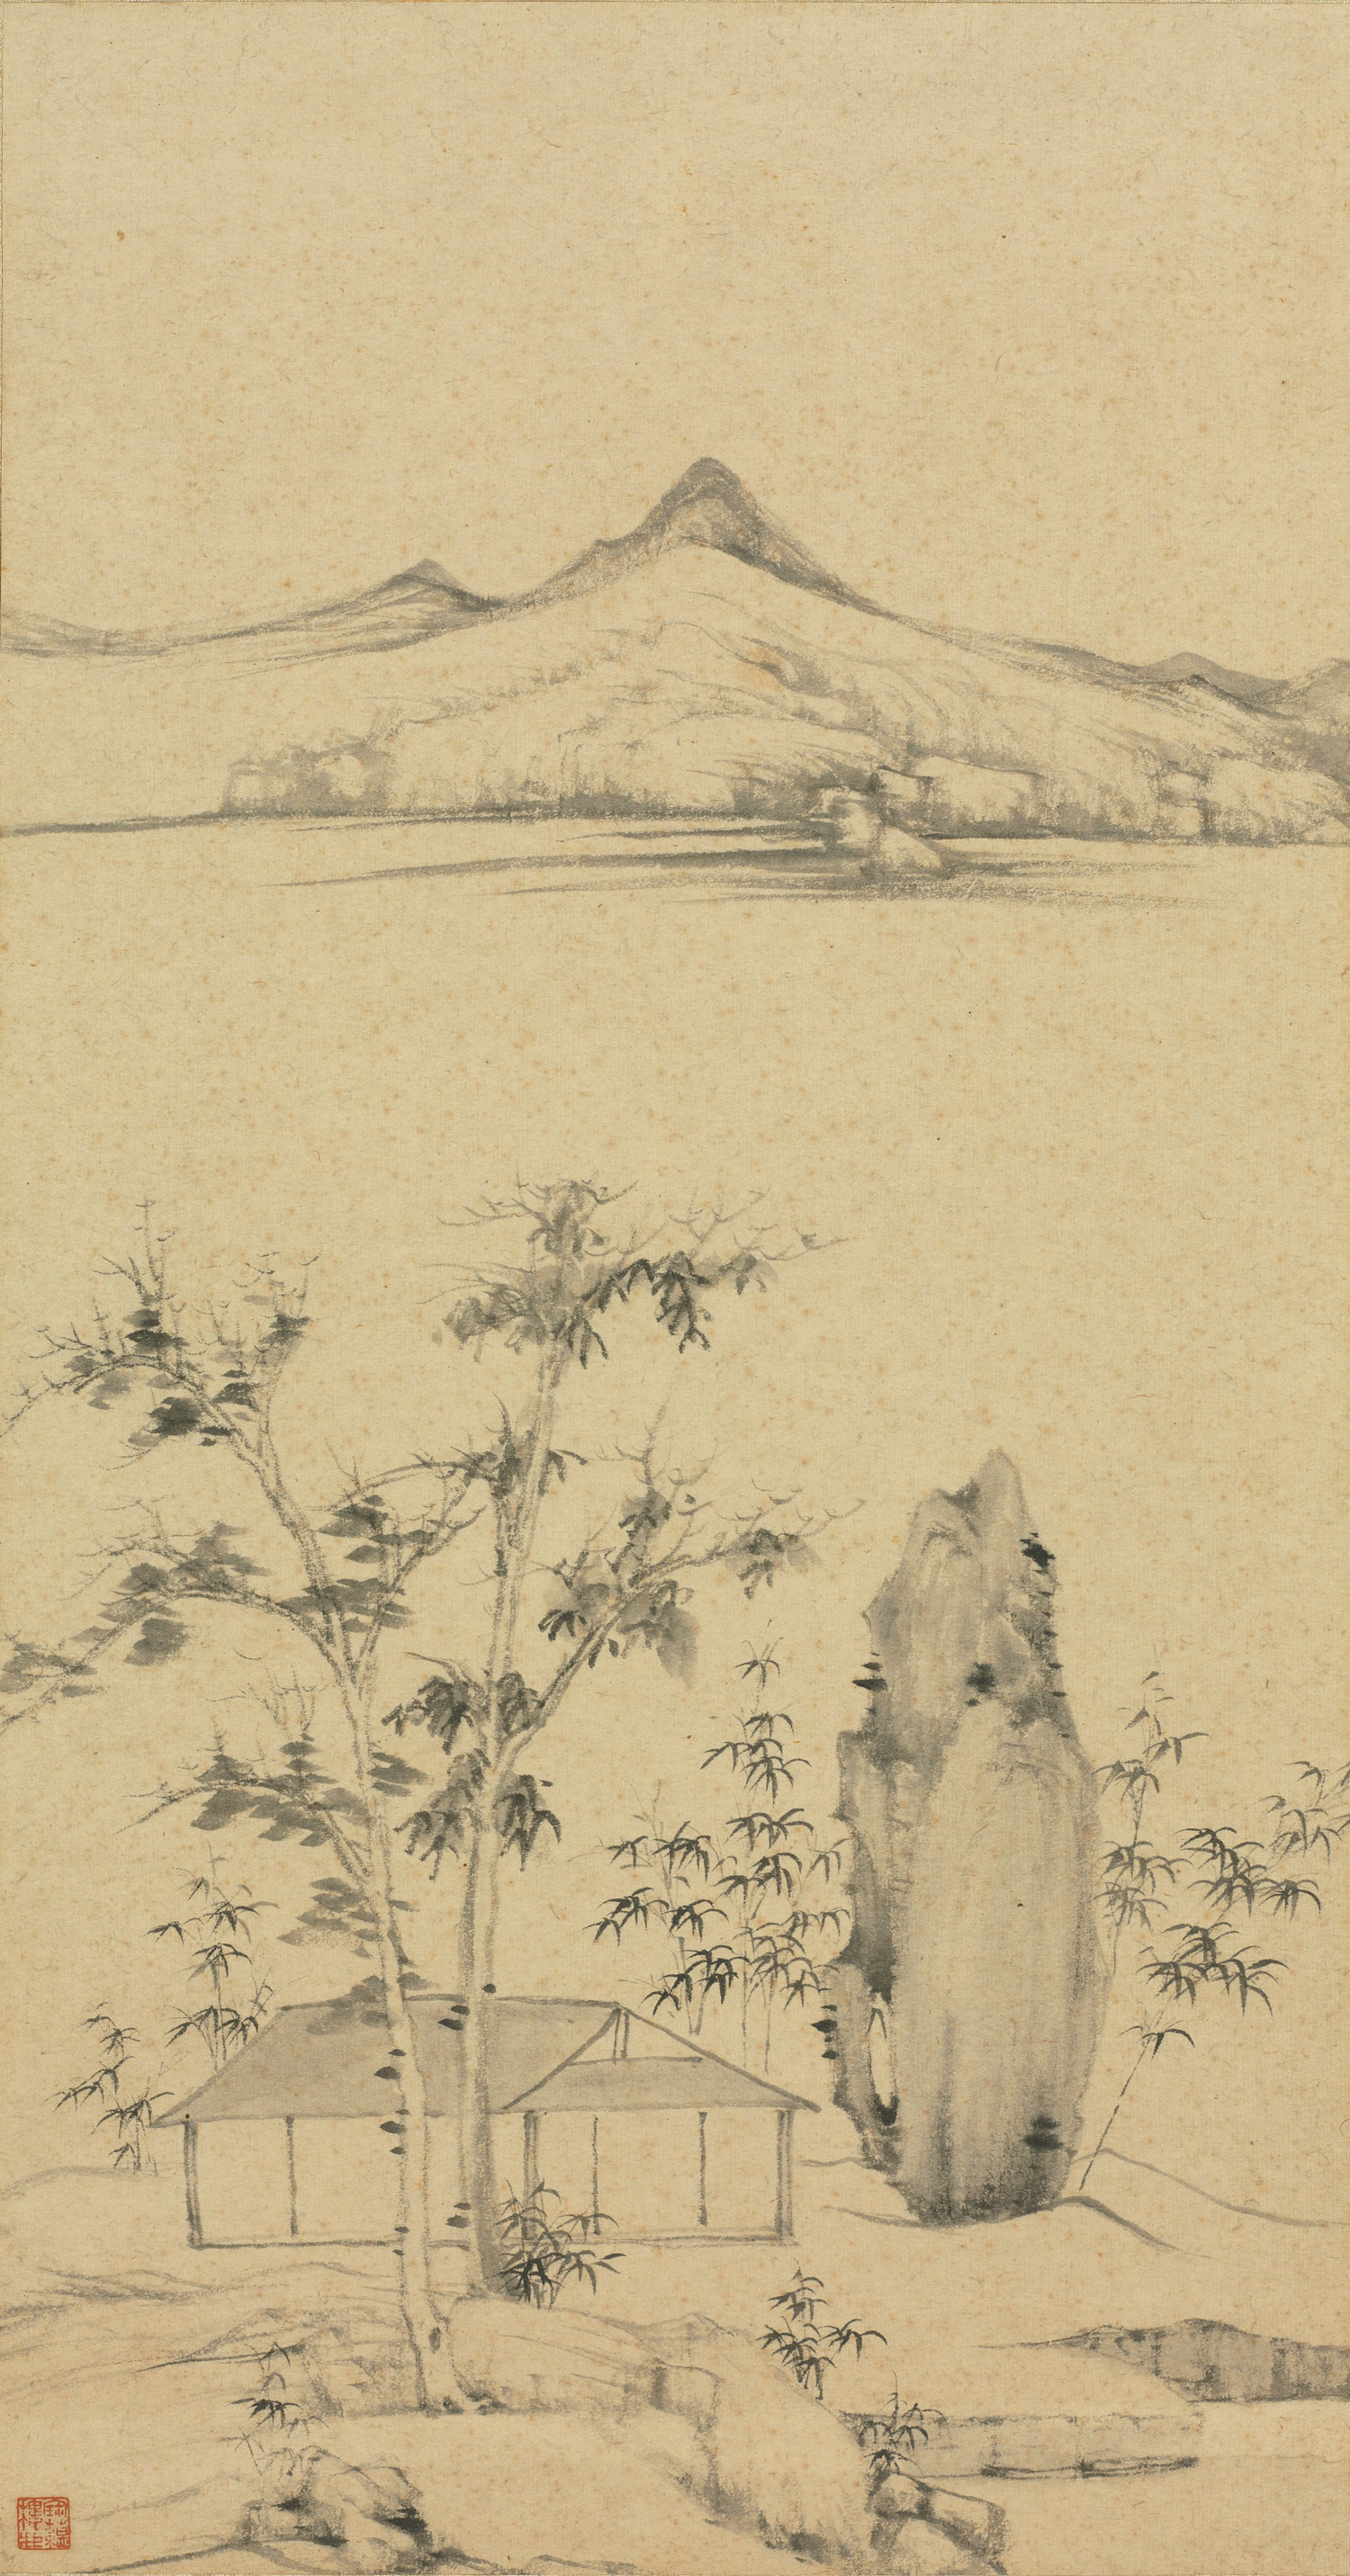 From "Album of Reduced Copies in Imitation of Song and Yuan Paintings with Colophons"